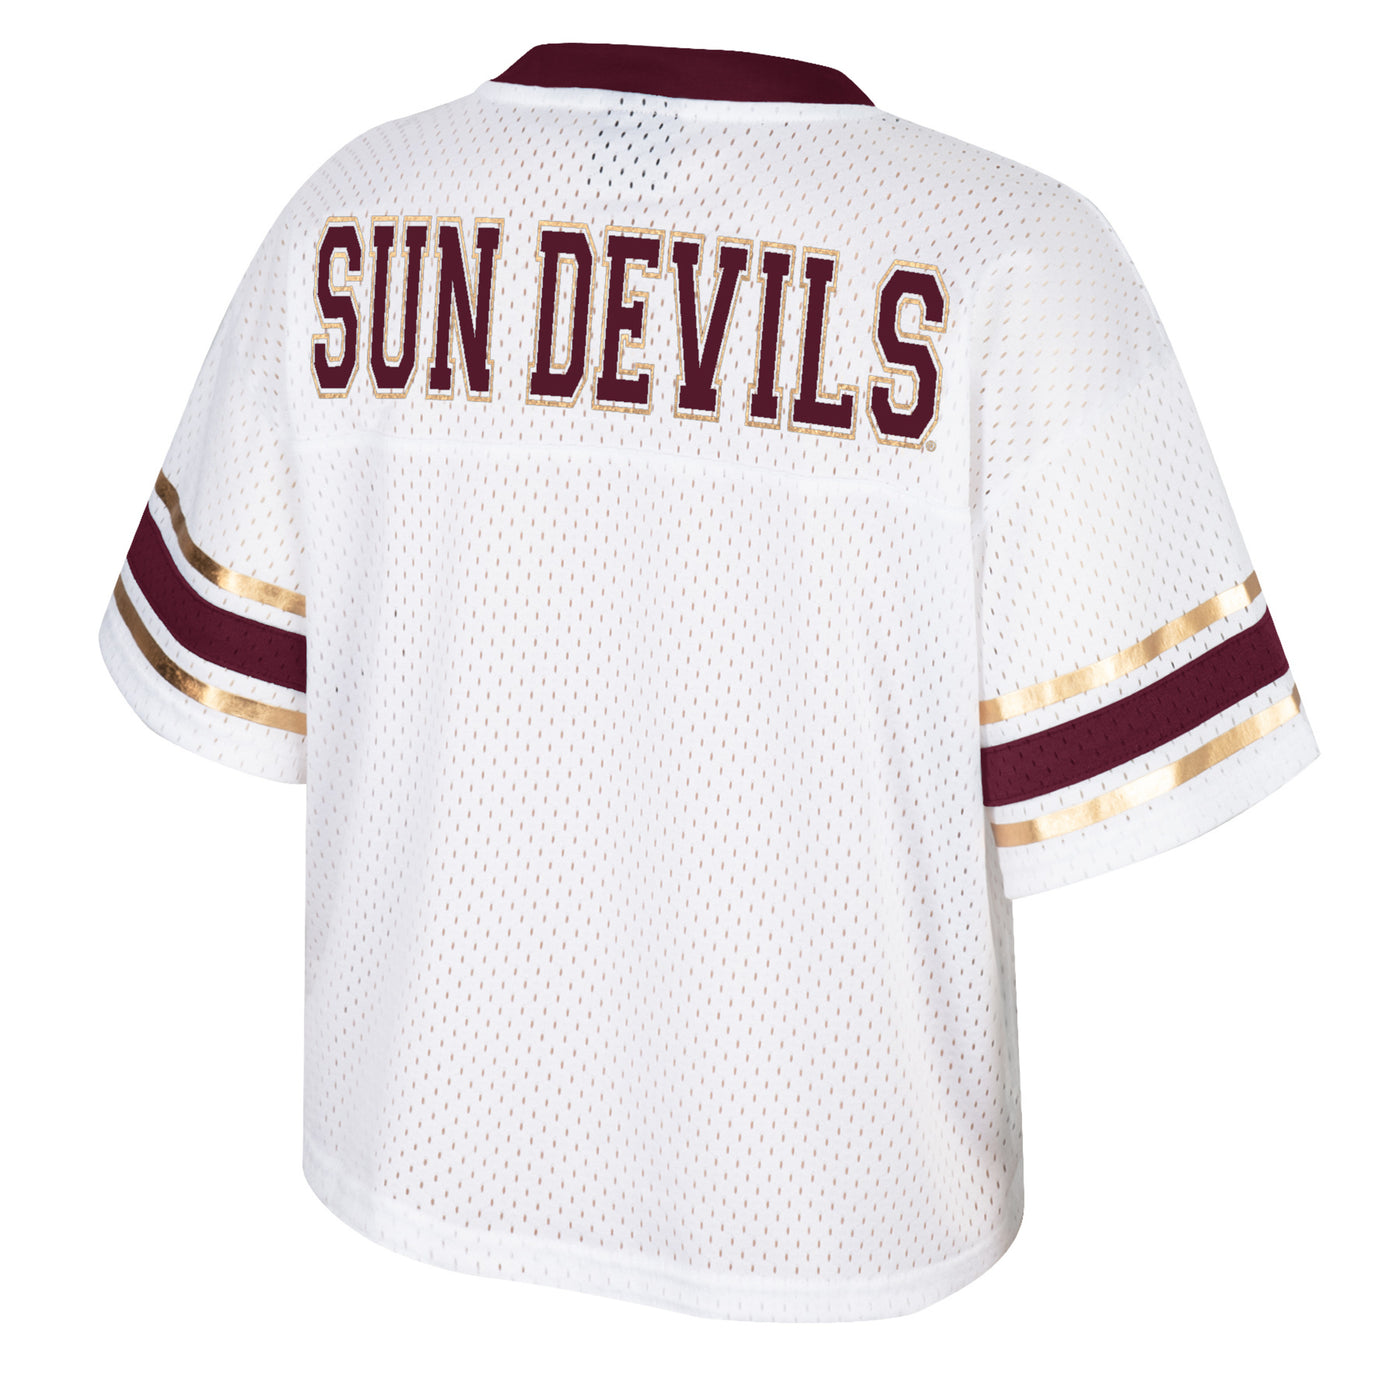 Backside of ASU cropped jersey. There is the text 